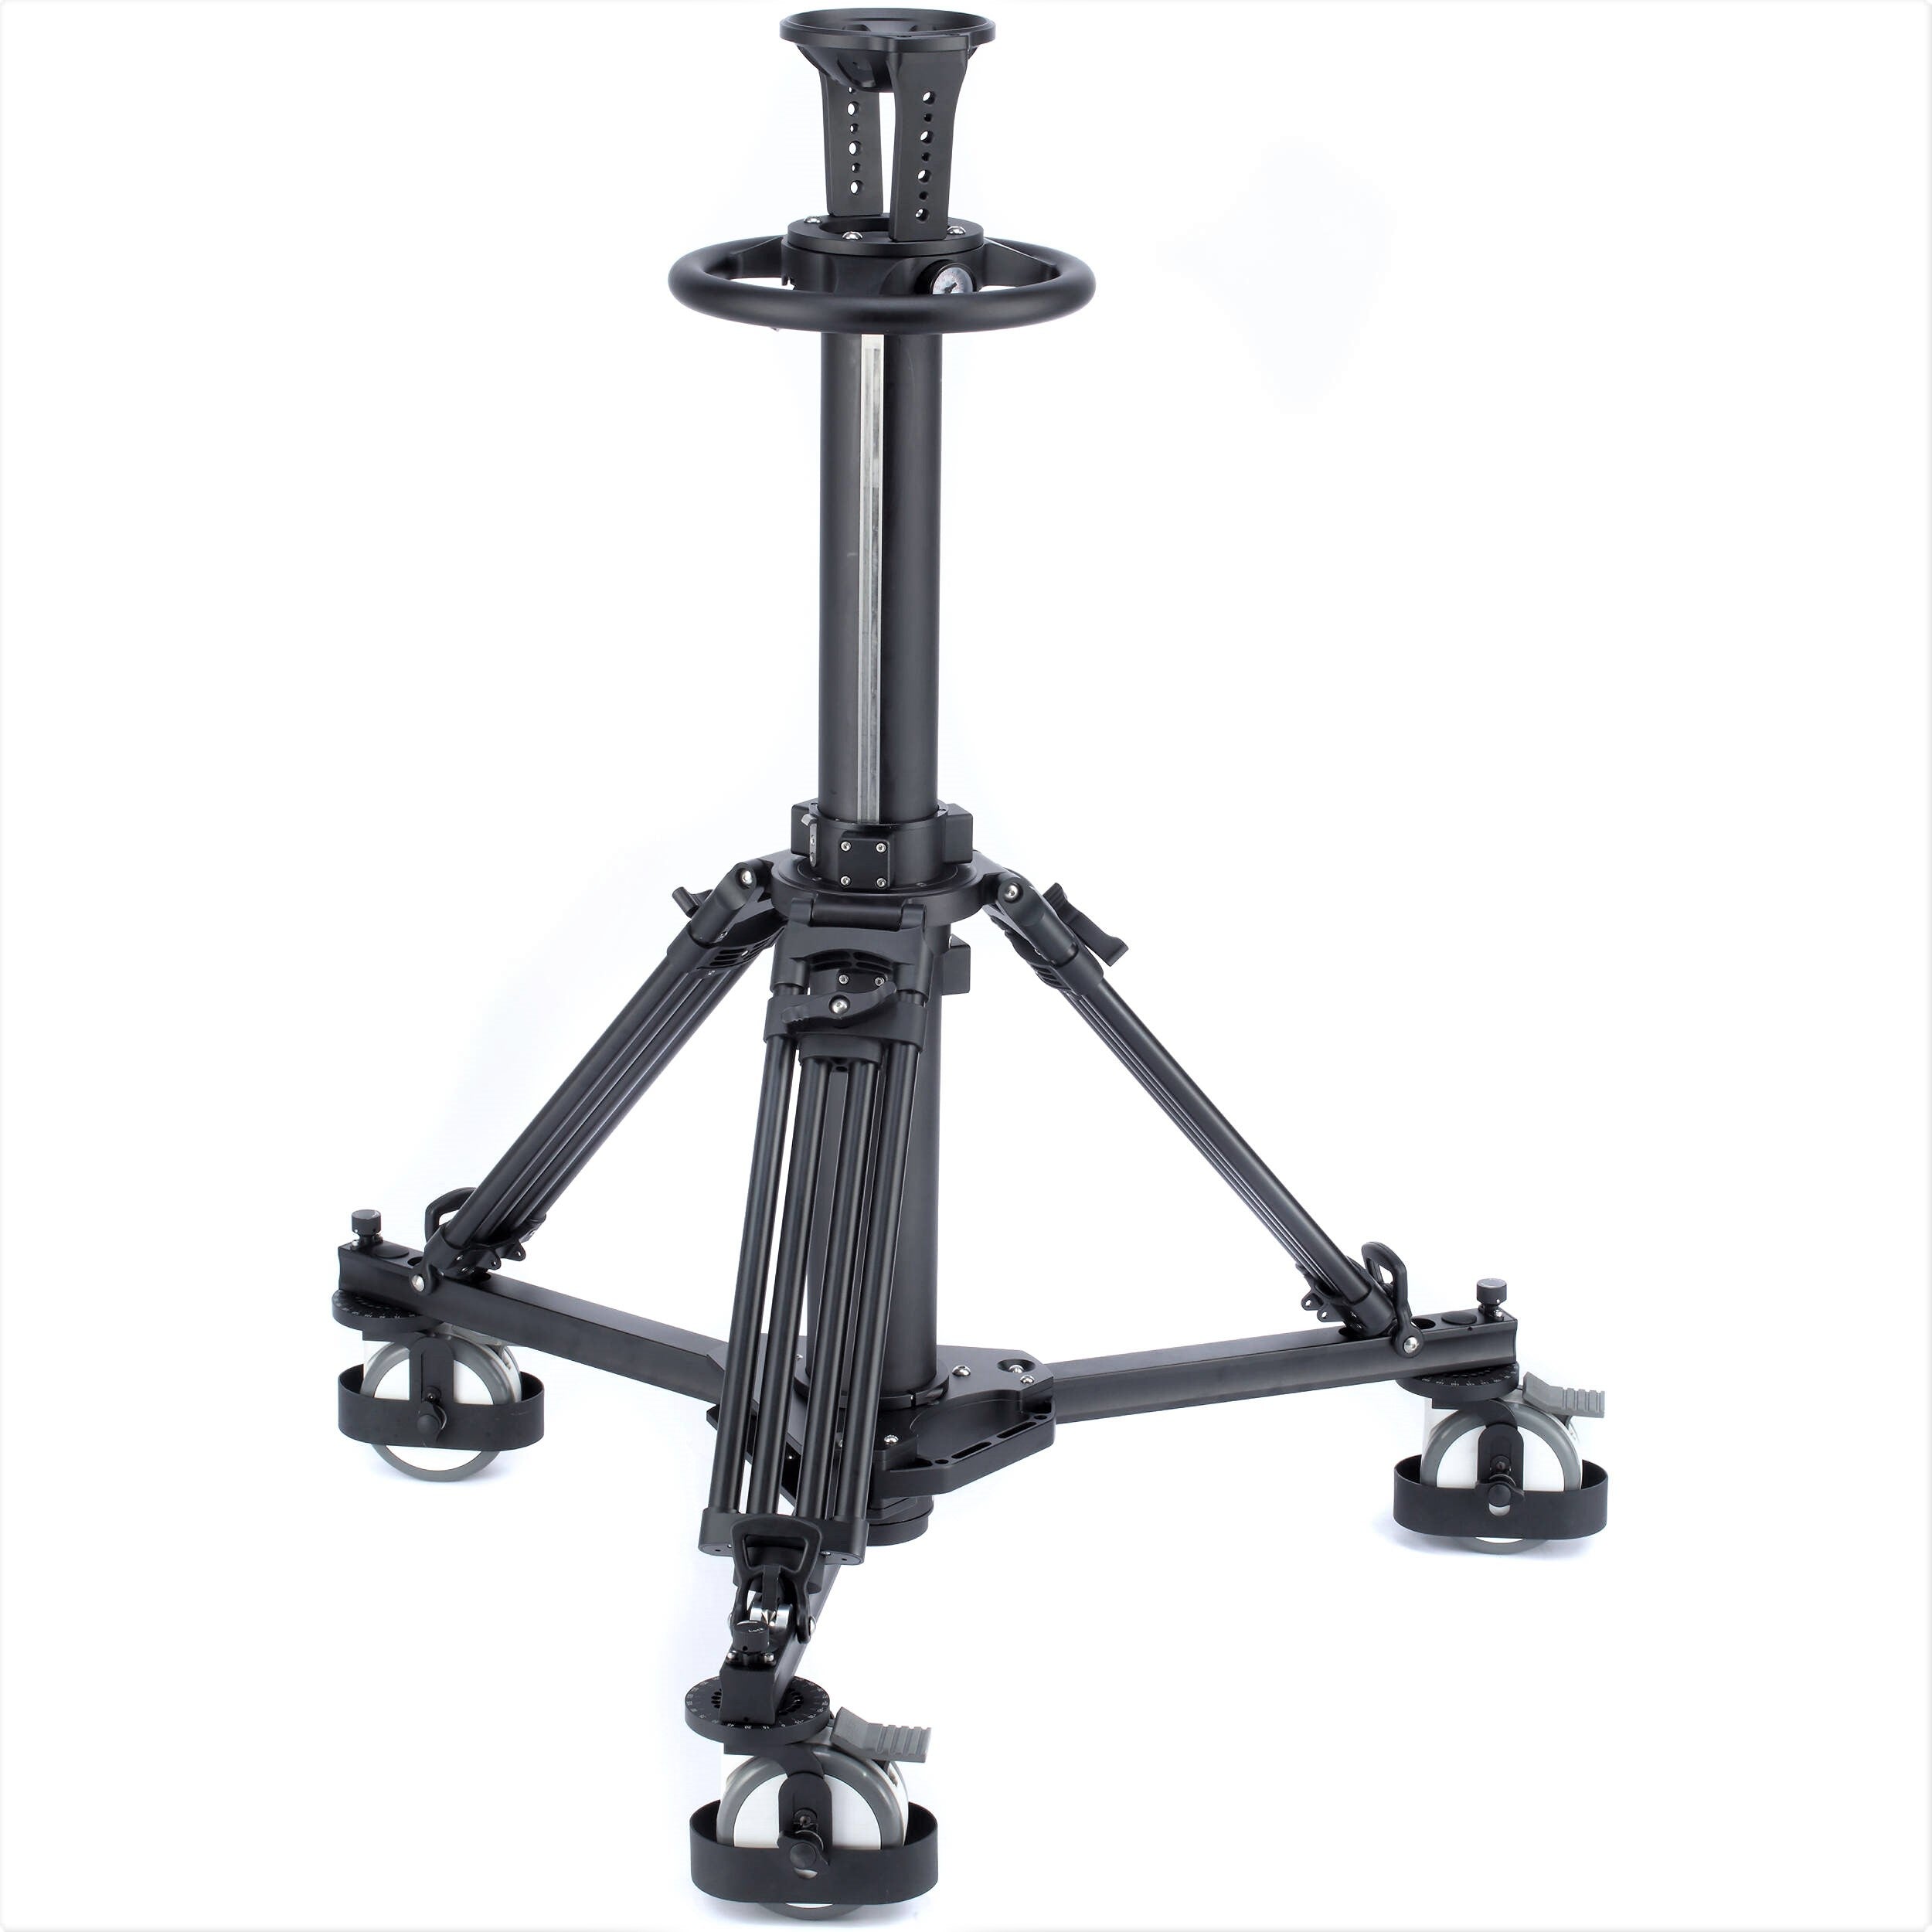 OZEN PED 50 Pneumatic Video Pedestal Kit with Wheeled Dolly